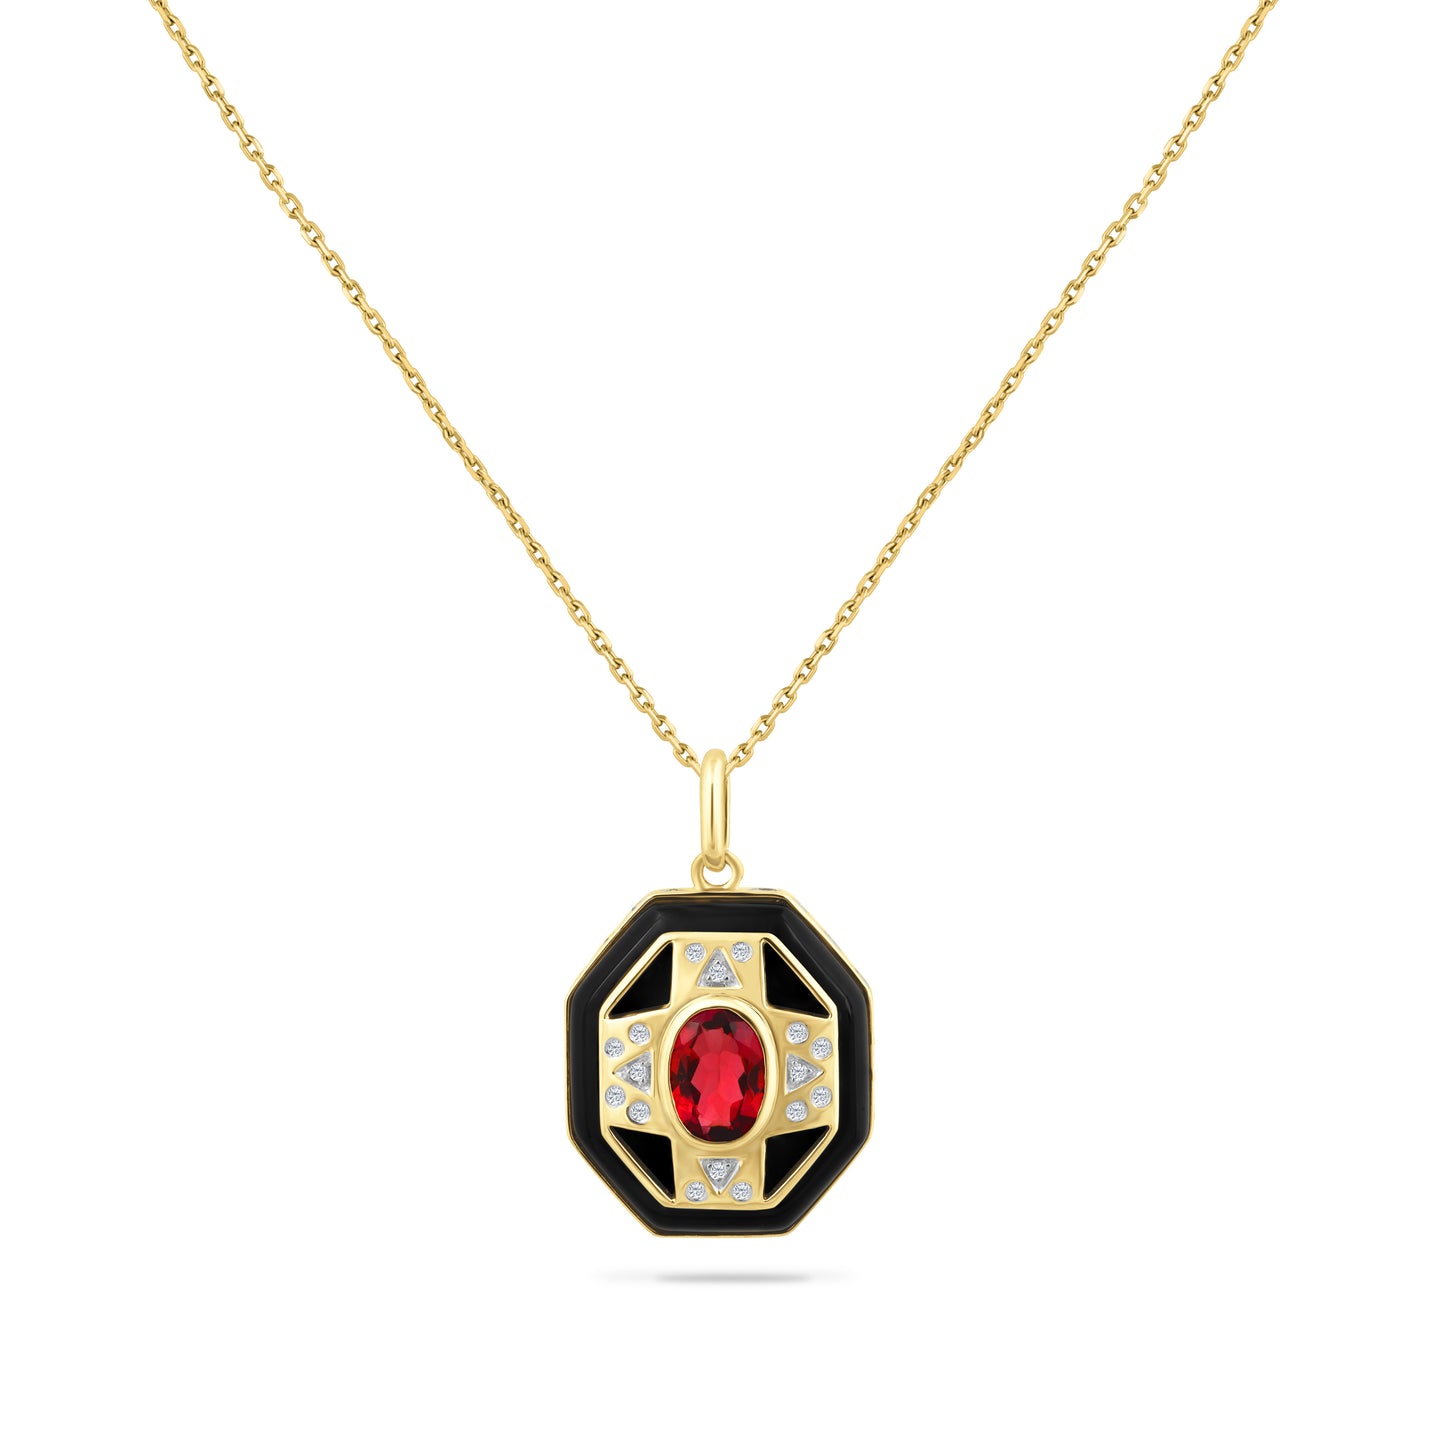 14K PENDANT WITH 16 DIAMONDS 0.06CT, 1 PINK TOURMALINE 0.90CT & 1 BLACK ONYX 1.00CT ON 18 INCHES CHAIN